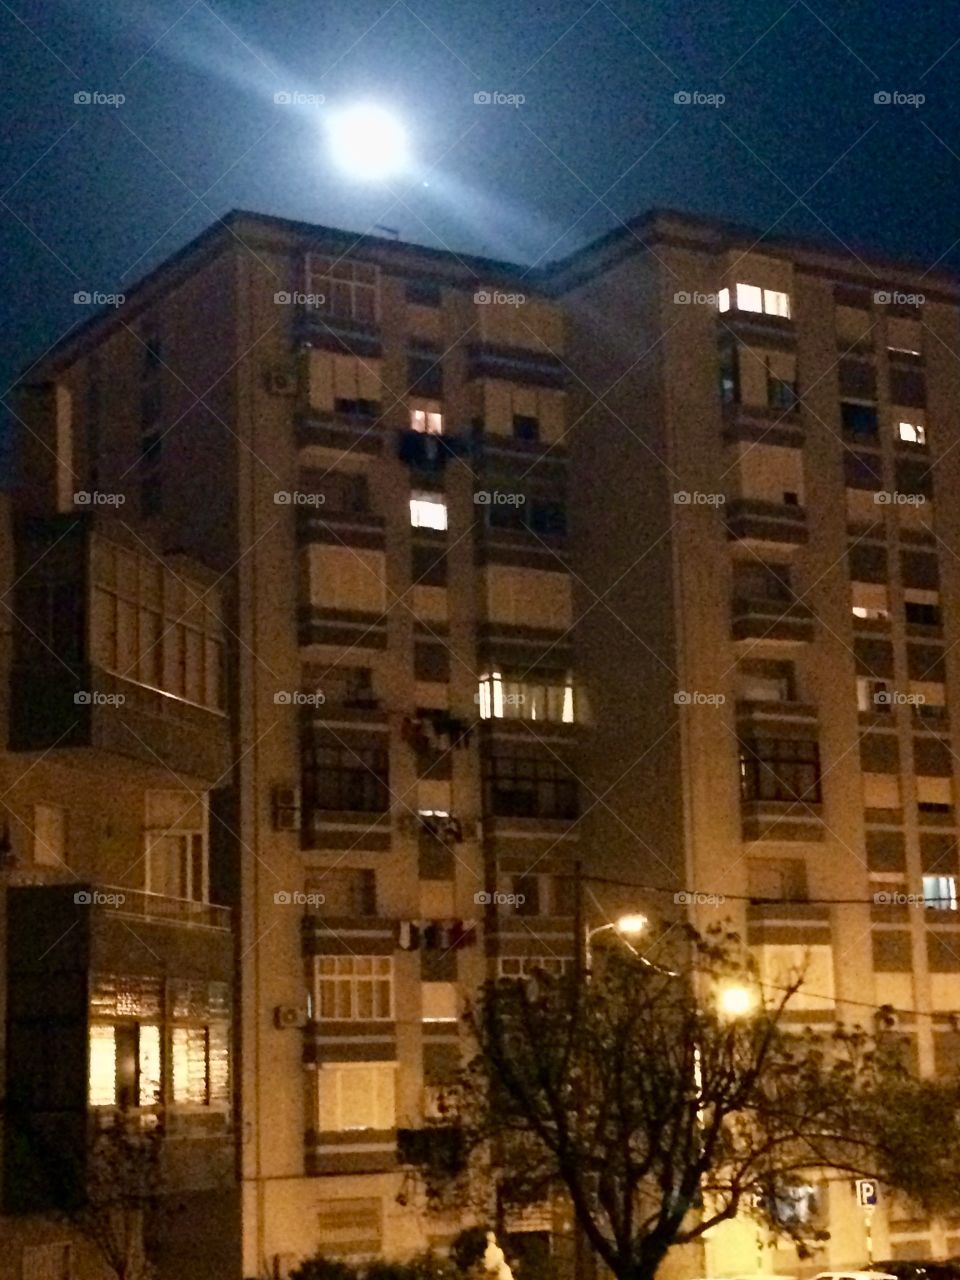 Building and full moon 🌙 